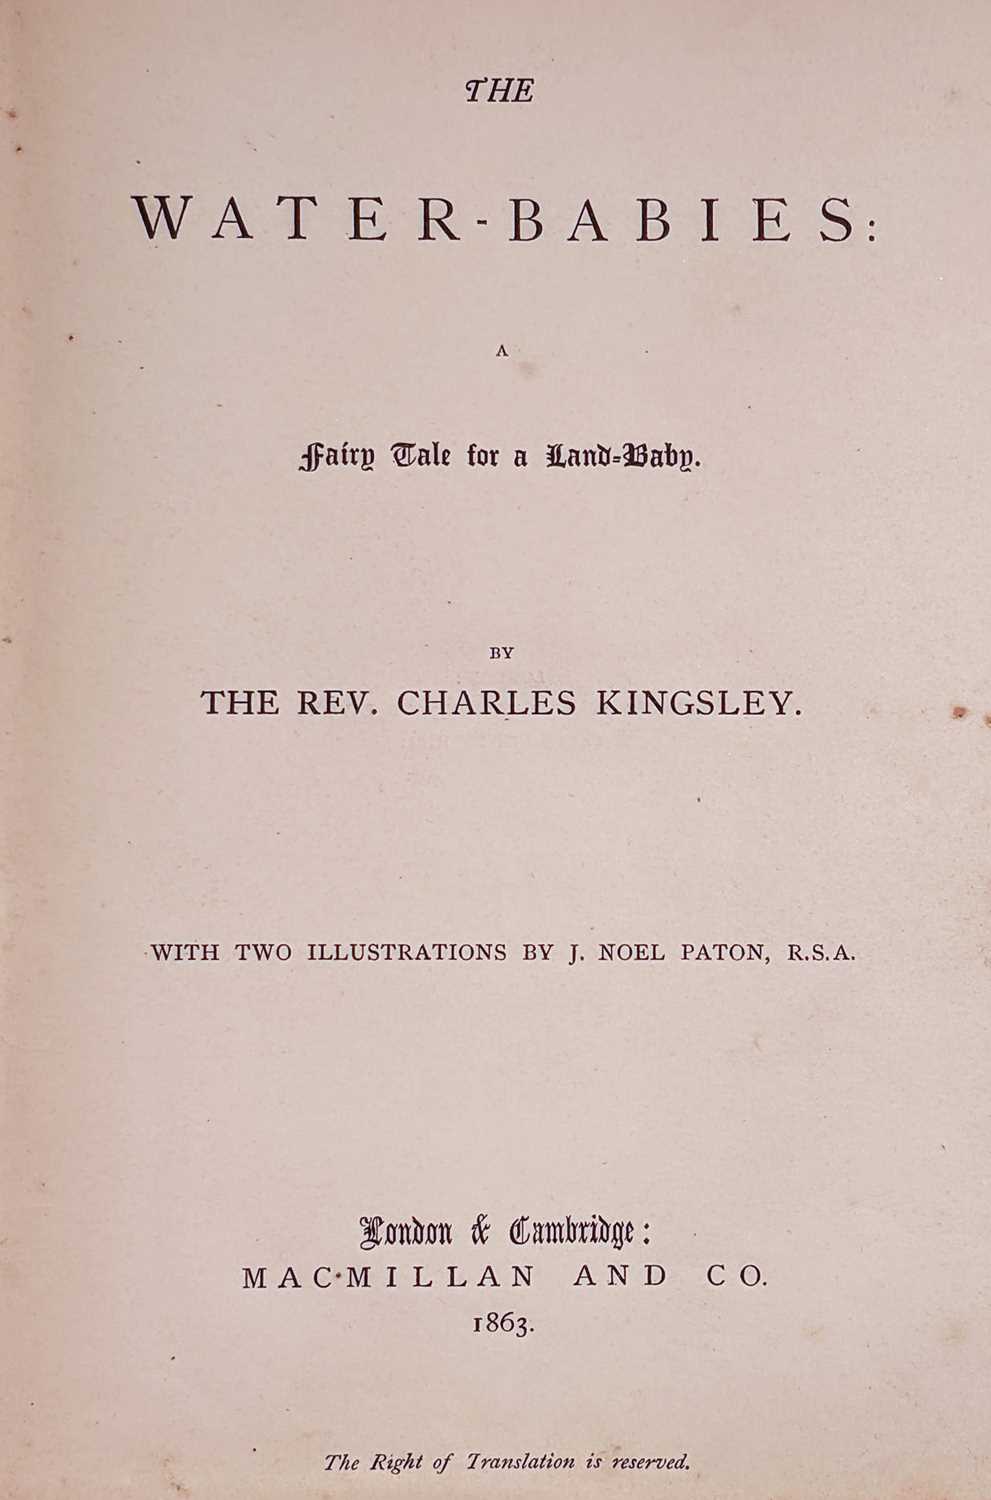 Lot 441 - Kingsley (Charles). The Water-Babies, 1st edition, 1863